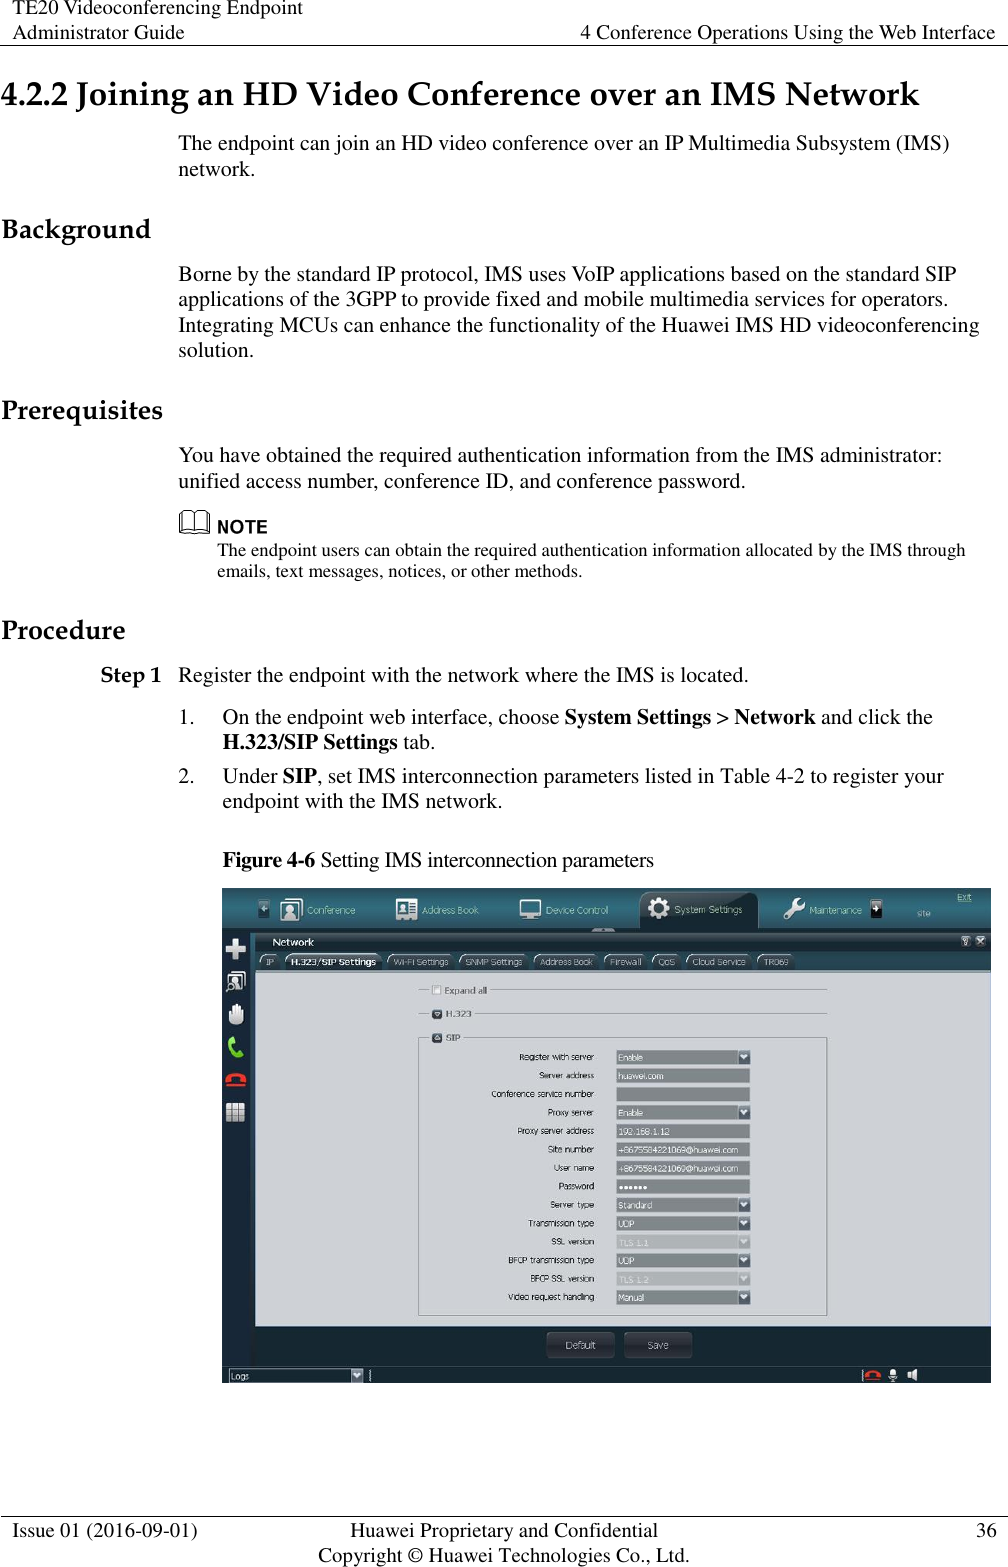 TE20 Videoconferencing Endpoint Administrator Guide 4 Conference Operations Using the Web Interface  Issue 01 (2016-09-01) Huawei Proprietary and Confidential                                     Copyright © Huawei Technologies Co., Ltd. 36  4.2.2 Joining an HD Video Conference over an IMS Network The endpoint can join an HD video conference over an IP Multimedia Subsystem (IMS) network. Background Borne by the standard IP protocol, IMS uses VoIP applications based on the standard SIP applications of the 3GPP to provide fixed and mobile multimedia services for operators. Integrating MCUs can enhance the functionality of the Huawei IMS HD videoconferencing solution. Prerequisites You have obtained the required authentication information from the IMS administrator: unified access number, conference ID, and conference password.  The endpoint users can obtain the required authentication information allocated by the IMS through emails, text messages, notices, or other methods.   Procedure Step 1 Register the endpoint with the network where the IMS is located. 1. On the endpoint web interface, choose System Settings &gt; Network and click the H.323/SIP Settings tab. 2. Under SIP, set IMS interconnection parameters listed in Table 4-2 to register your endpoint with the IMS network. Figure 4-6 Setting IMS interconnection parameters   